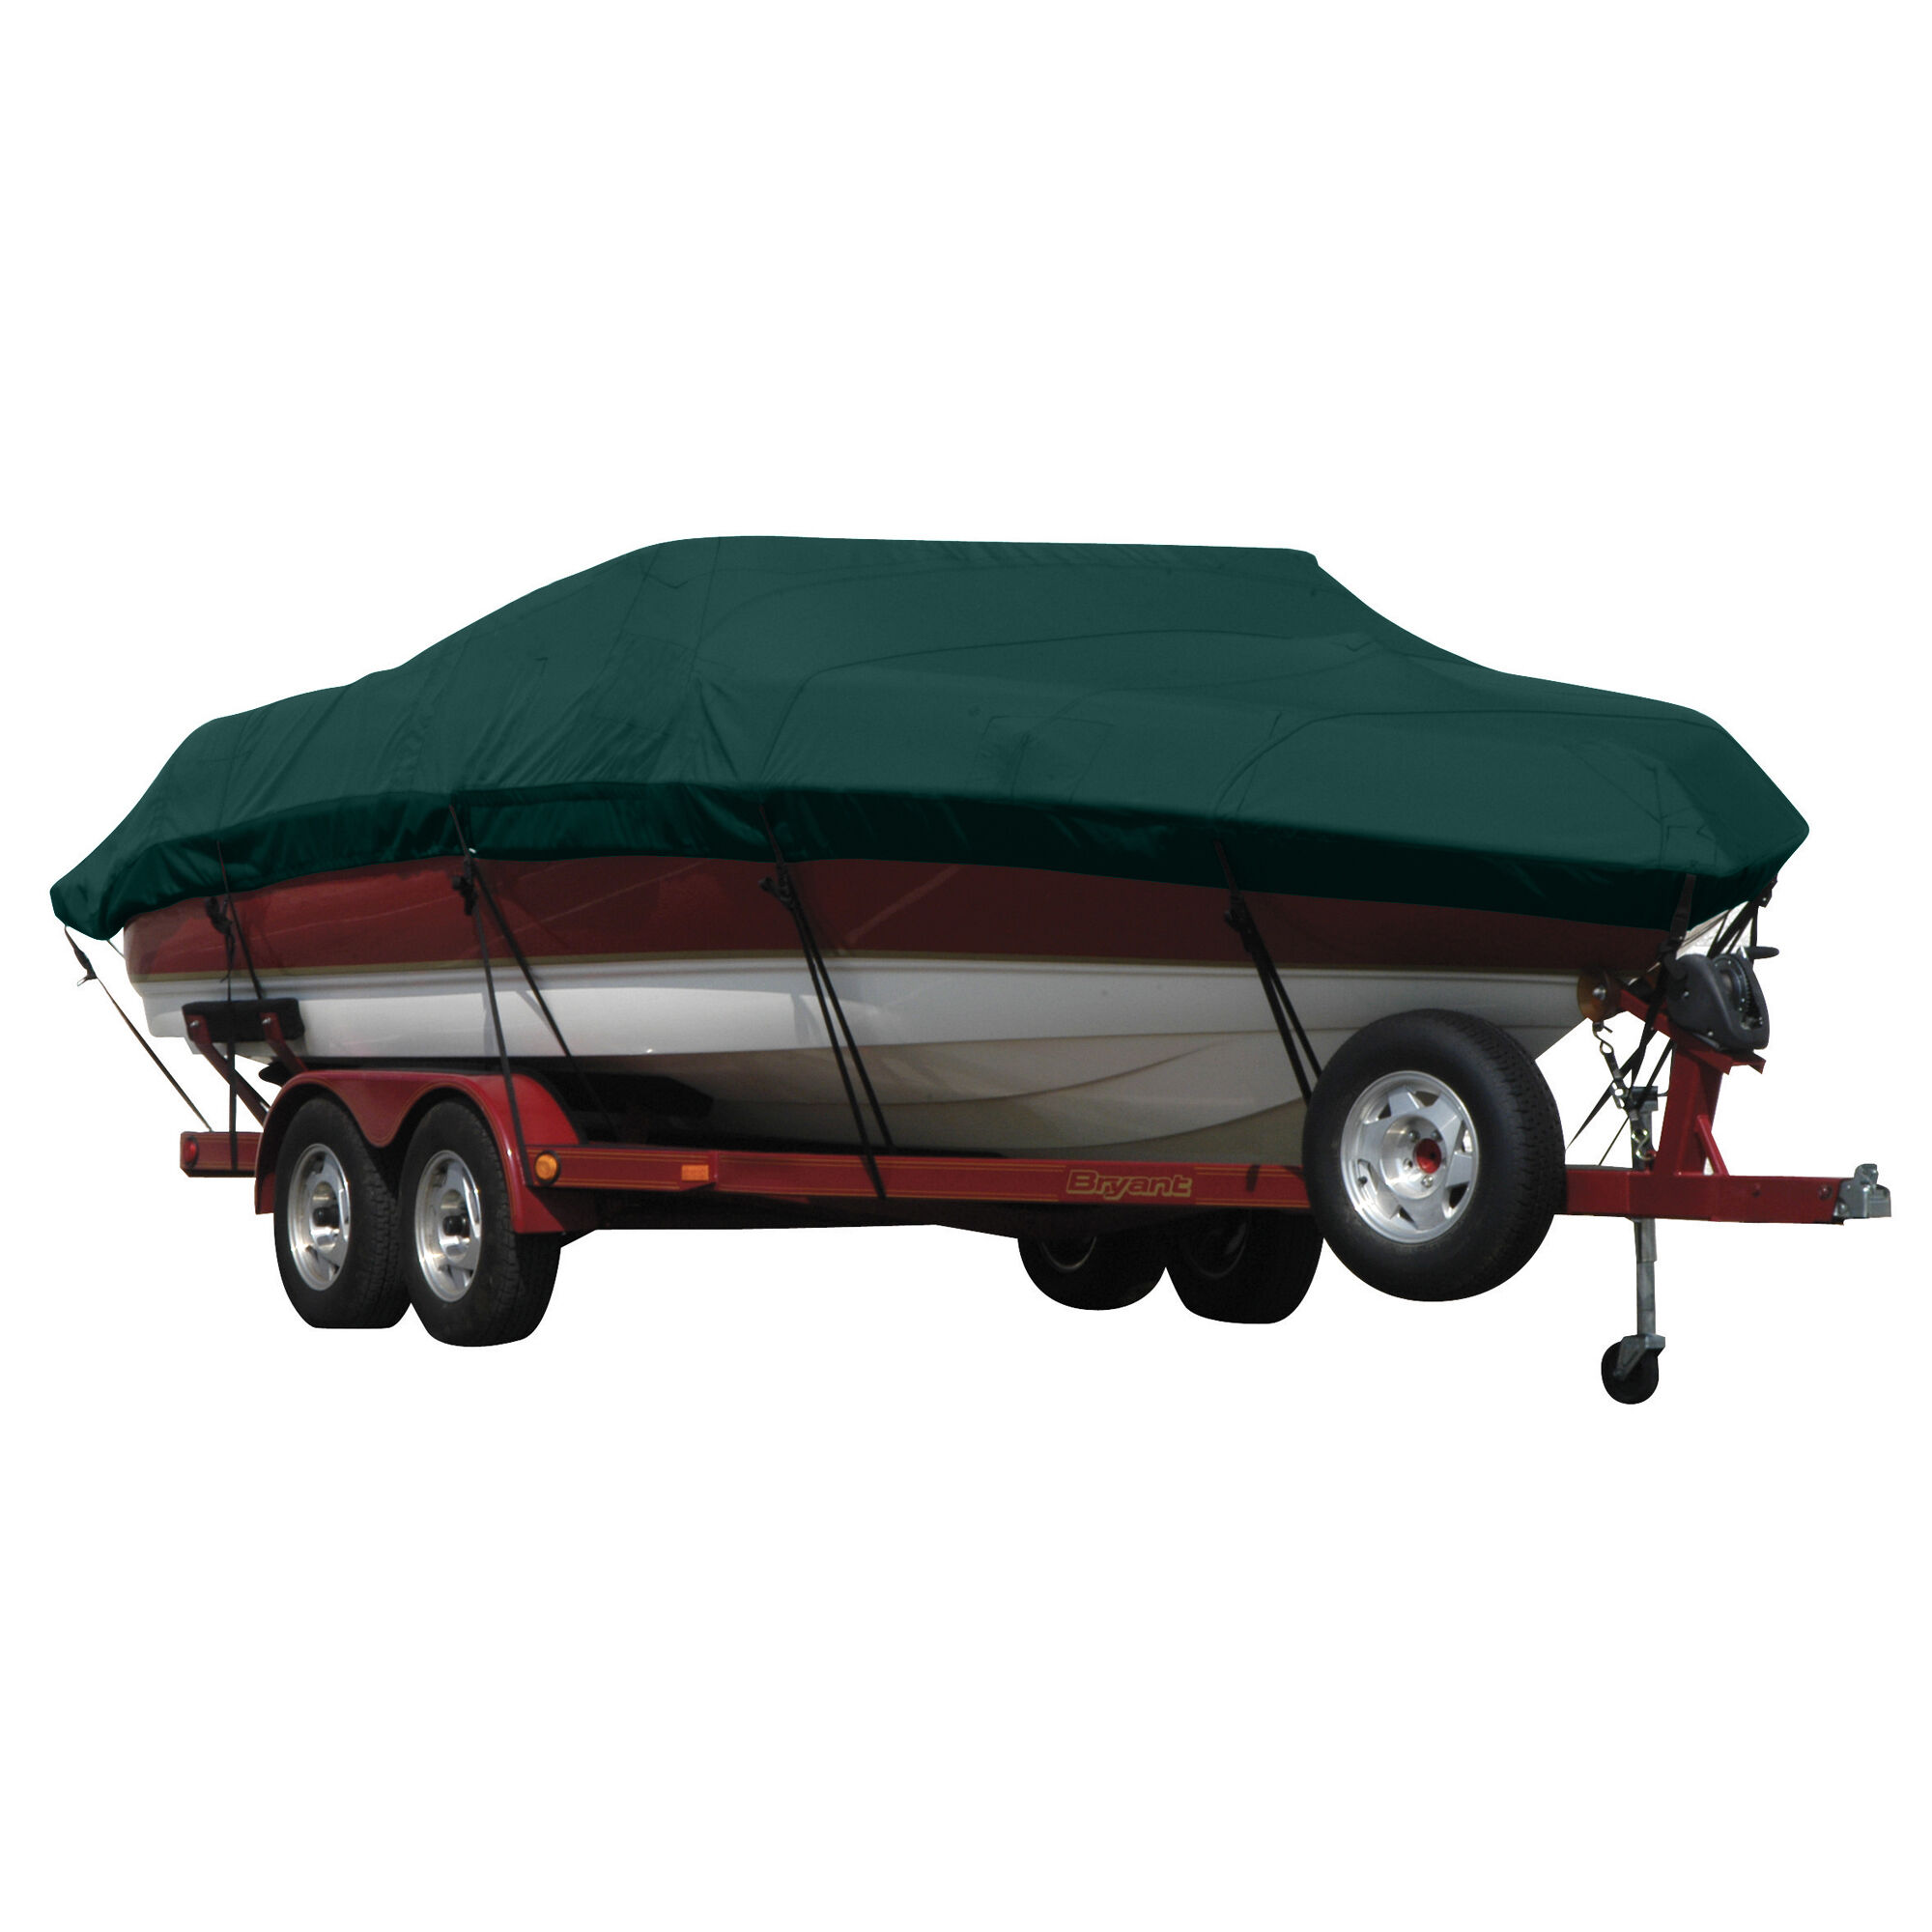 Covermate Exact Fit Sunbrella Boat Cover for Grady White Islander 26 Islander 26 Walk Around w/ Pulpit Hard Top O/B. Forest Green